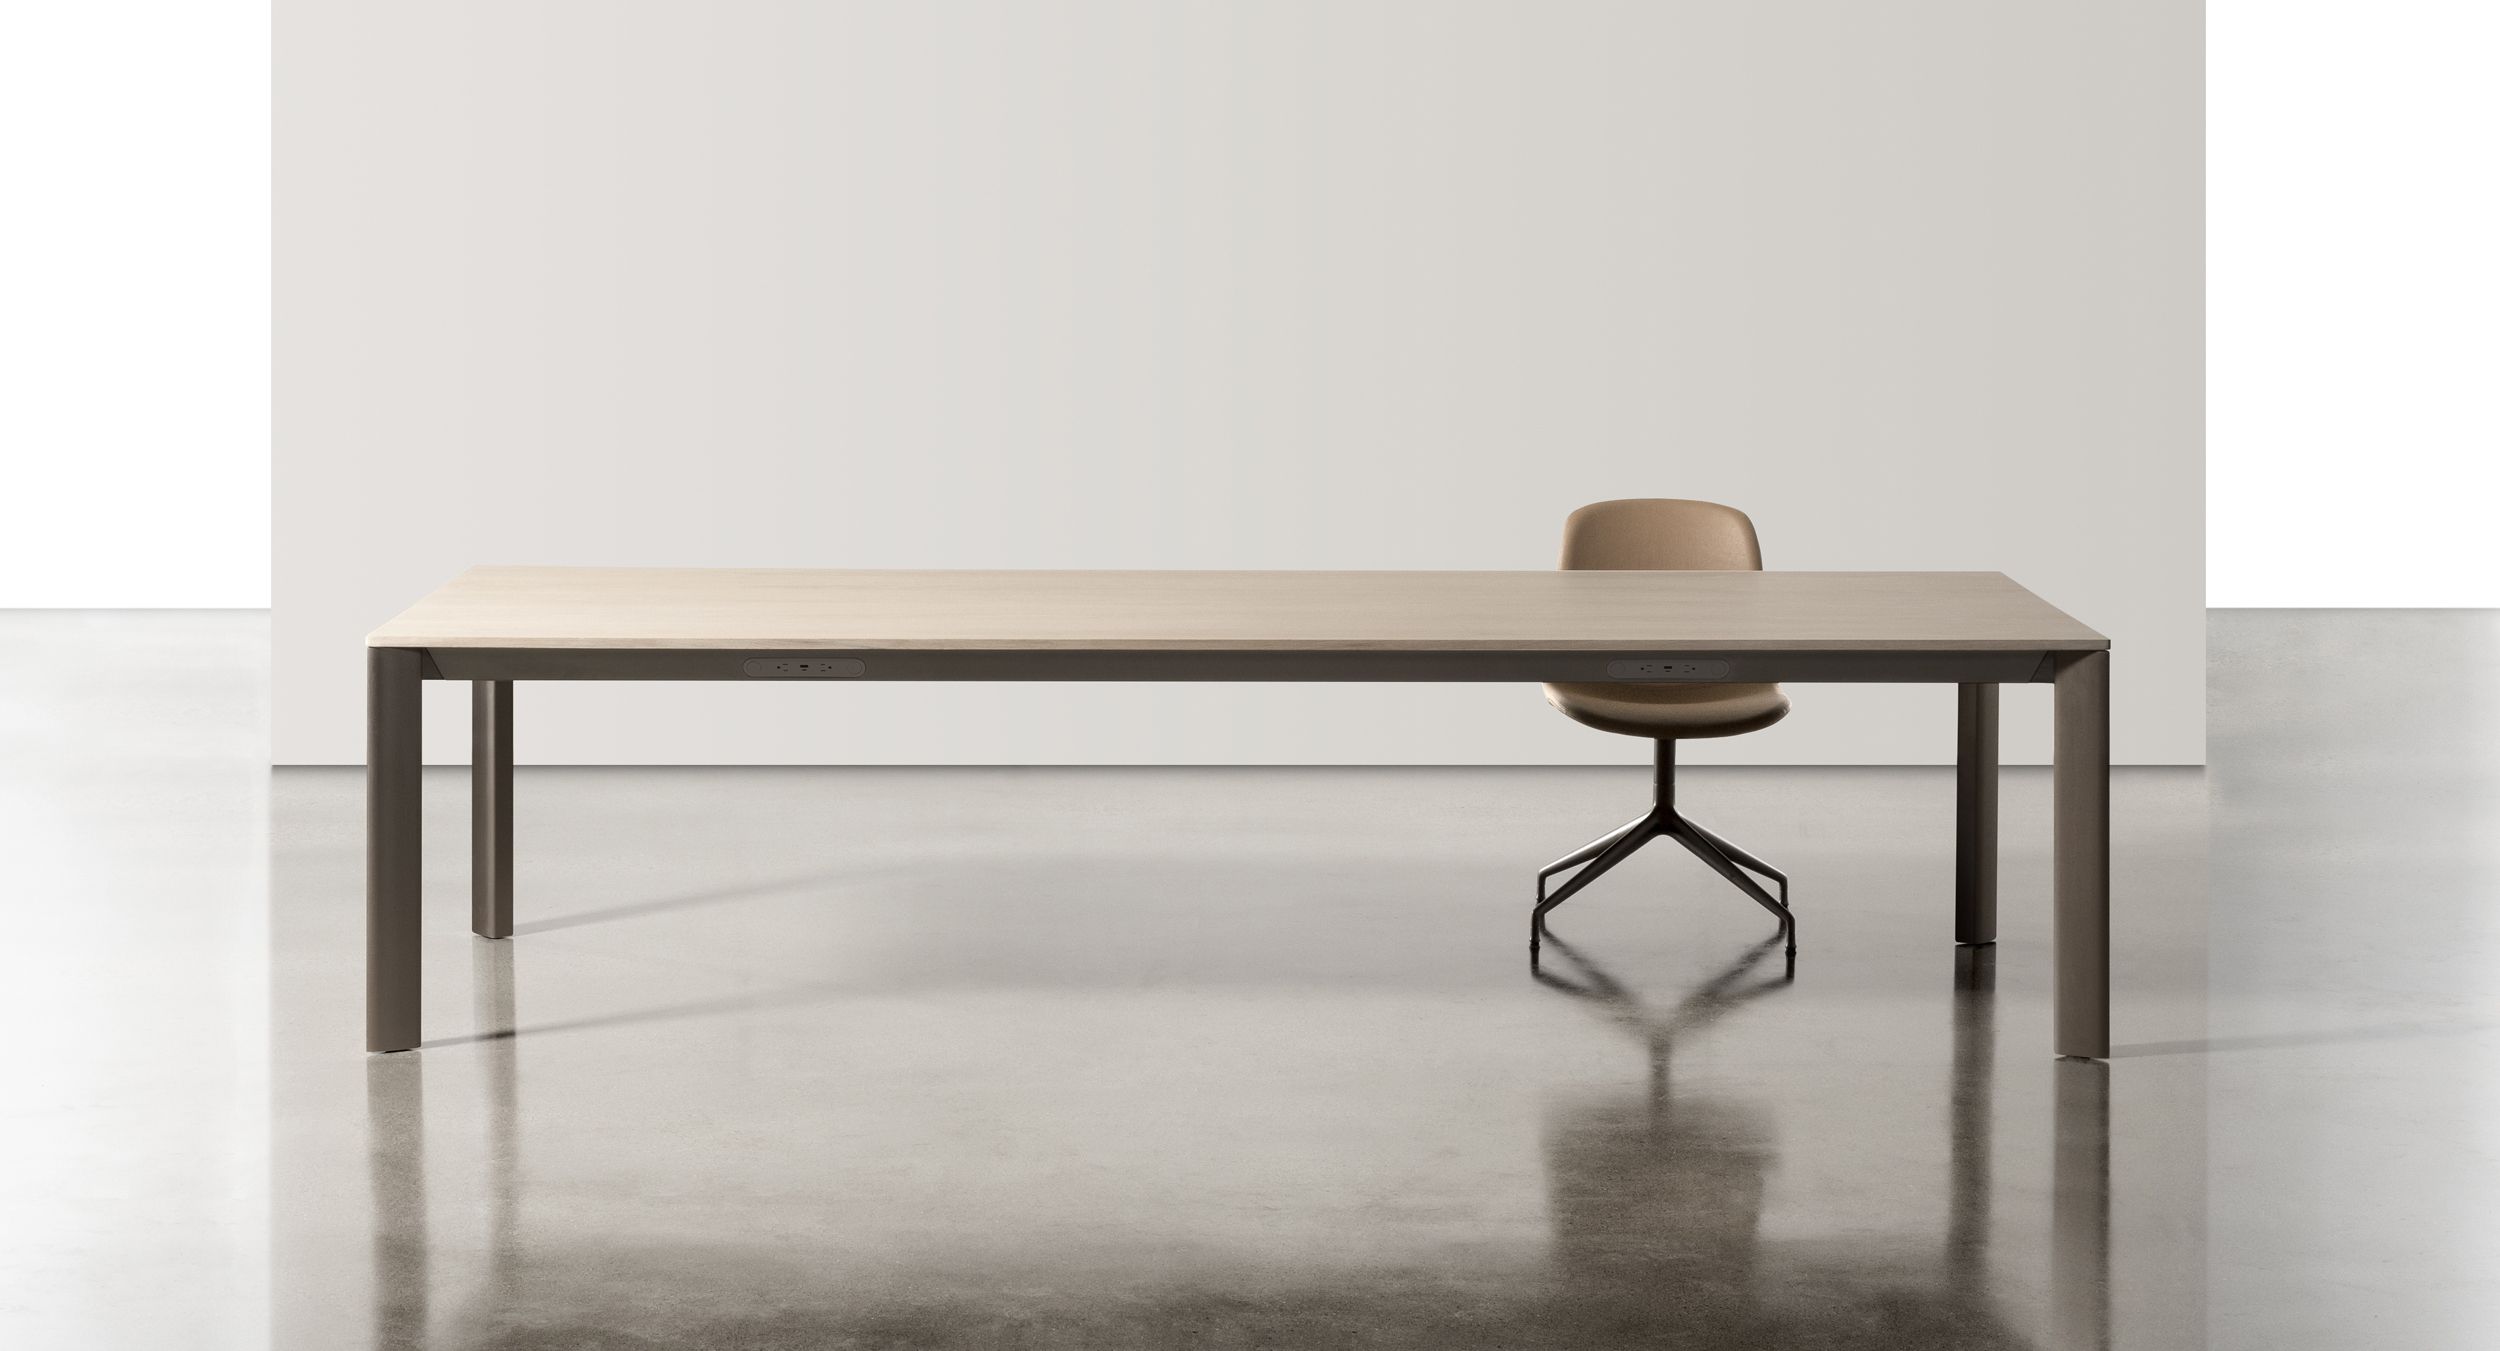 Power and data are smartly integrated into the table edge, seamlessly and conveniently meeting your technology needs.